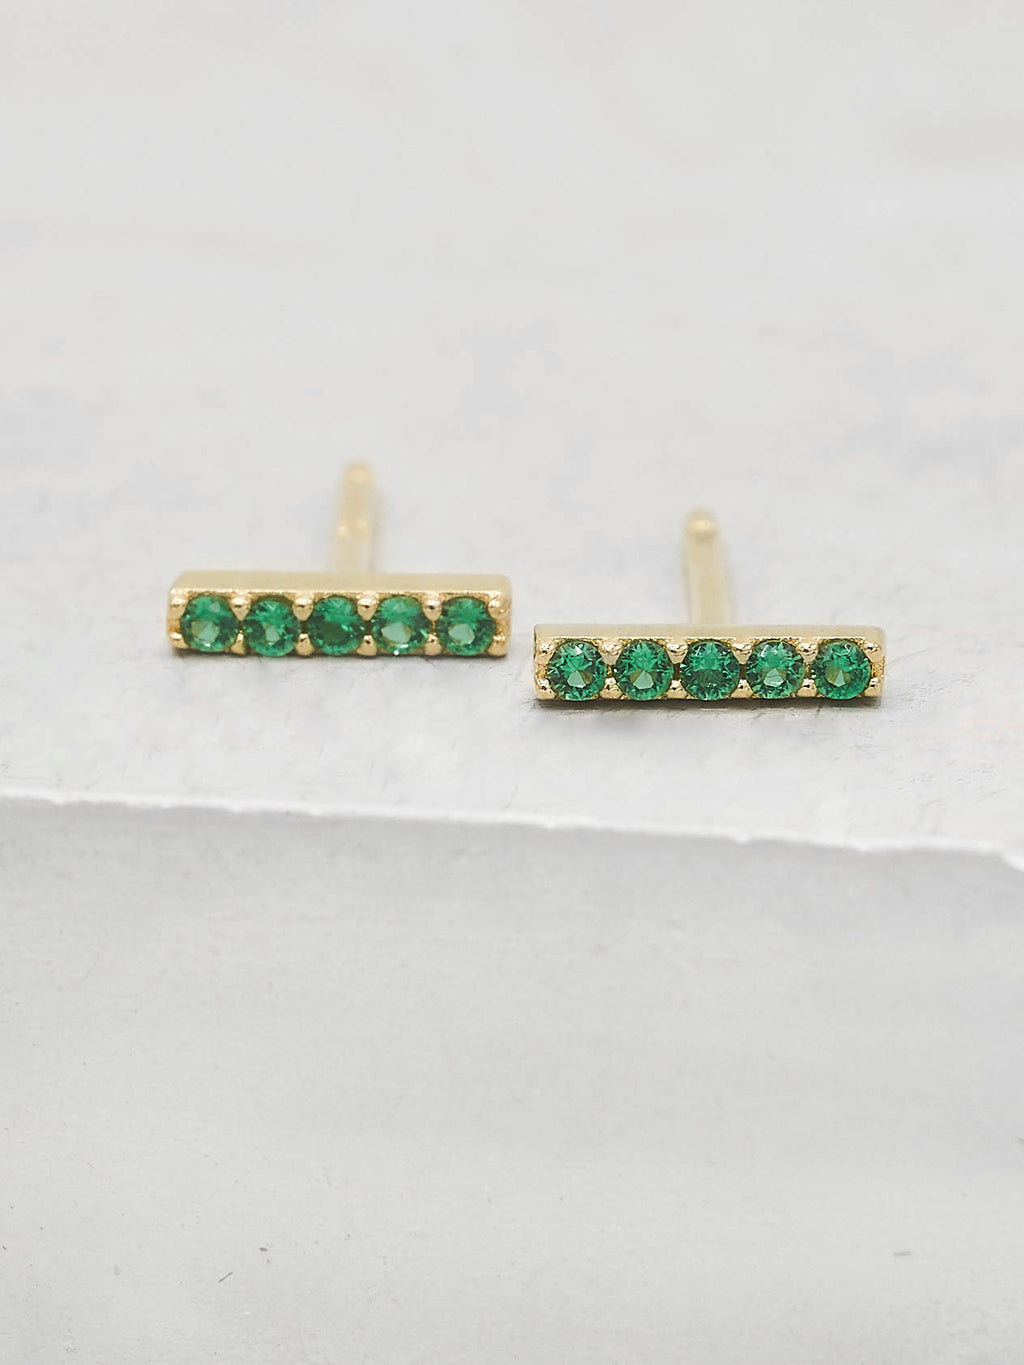 Bar design with Emerald Green CZ Stones Gold Plated Stud Earrings by the Faint Hearted Jewelry